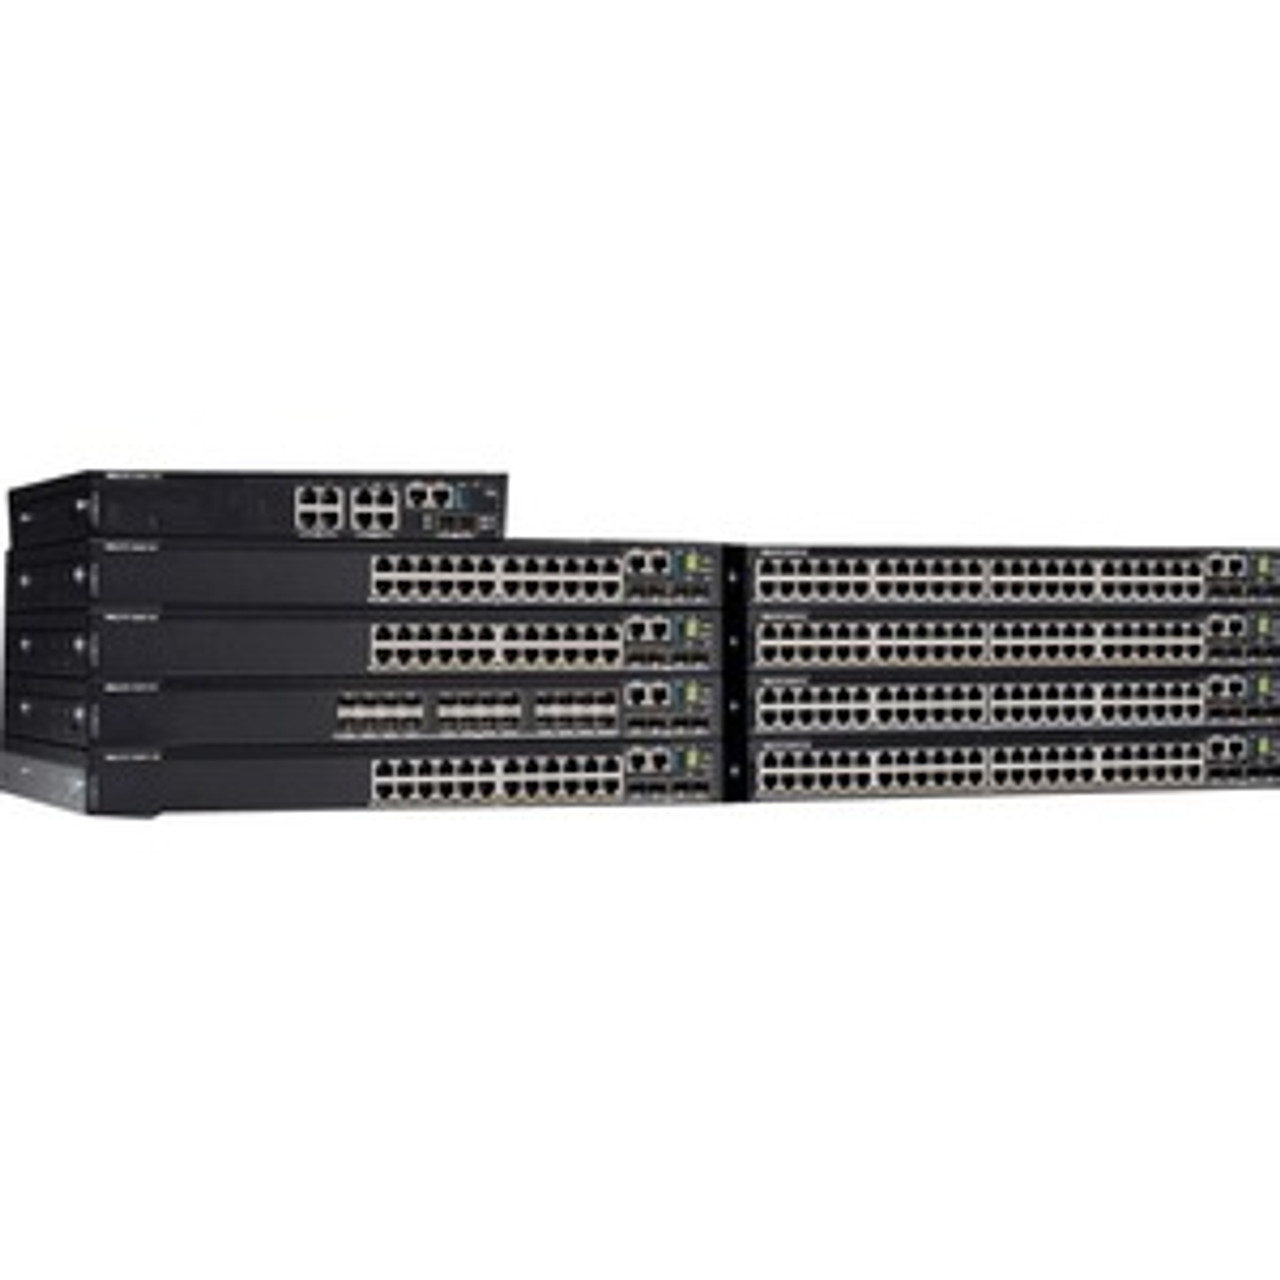 N3224F-ON Dell EMC PowerSwitch N3224F-ON Ethernet Switch - Manageable - 3 Layer Supported - Modular - 24 SFP Slots - 224 W Power Consumption - Optical Fiber -